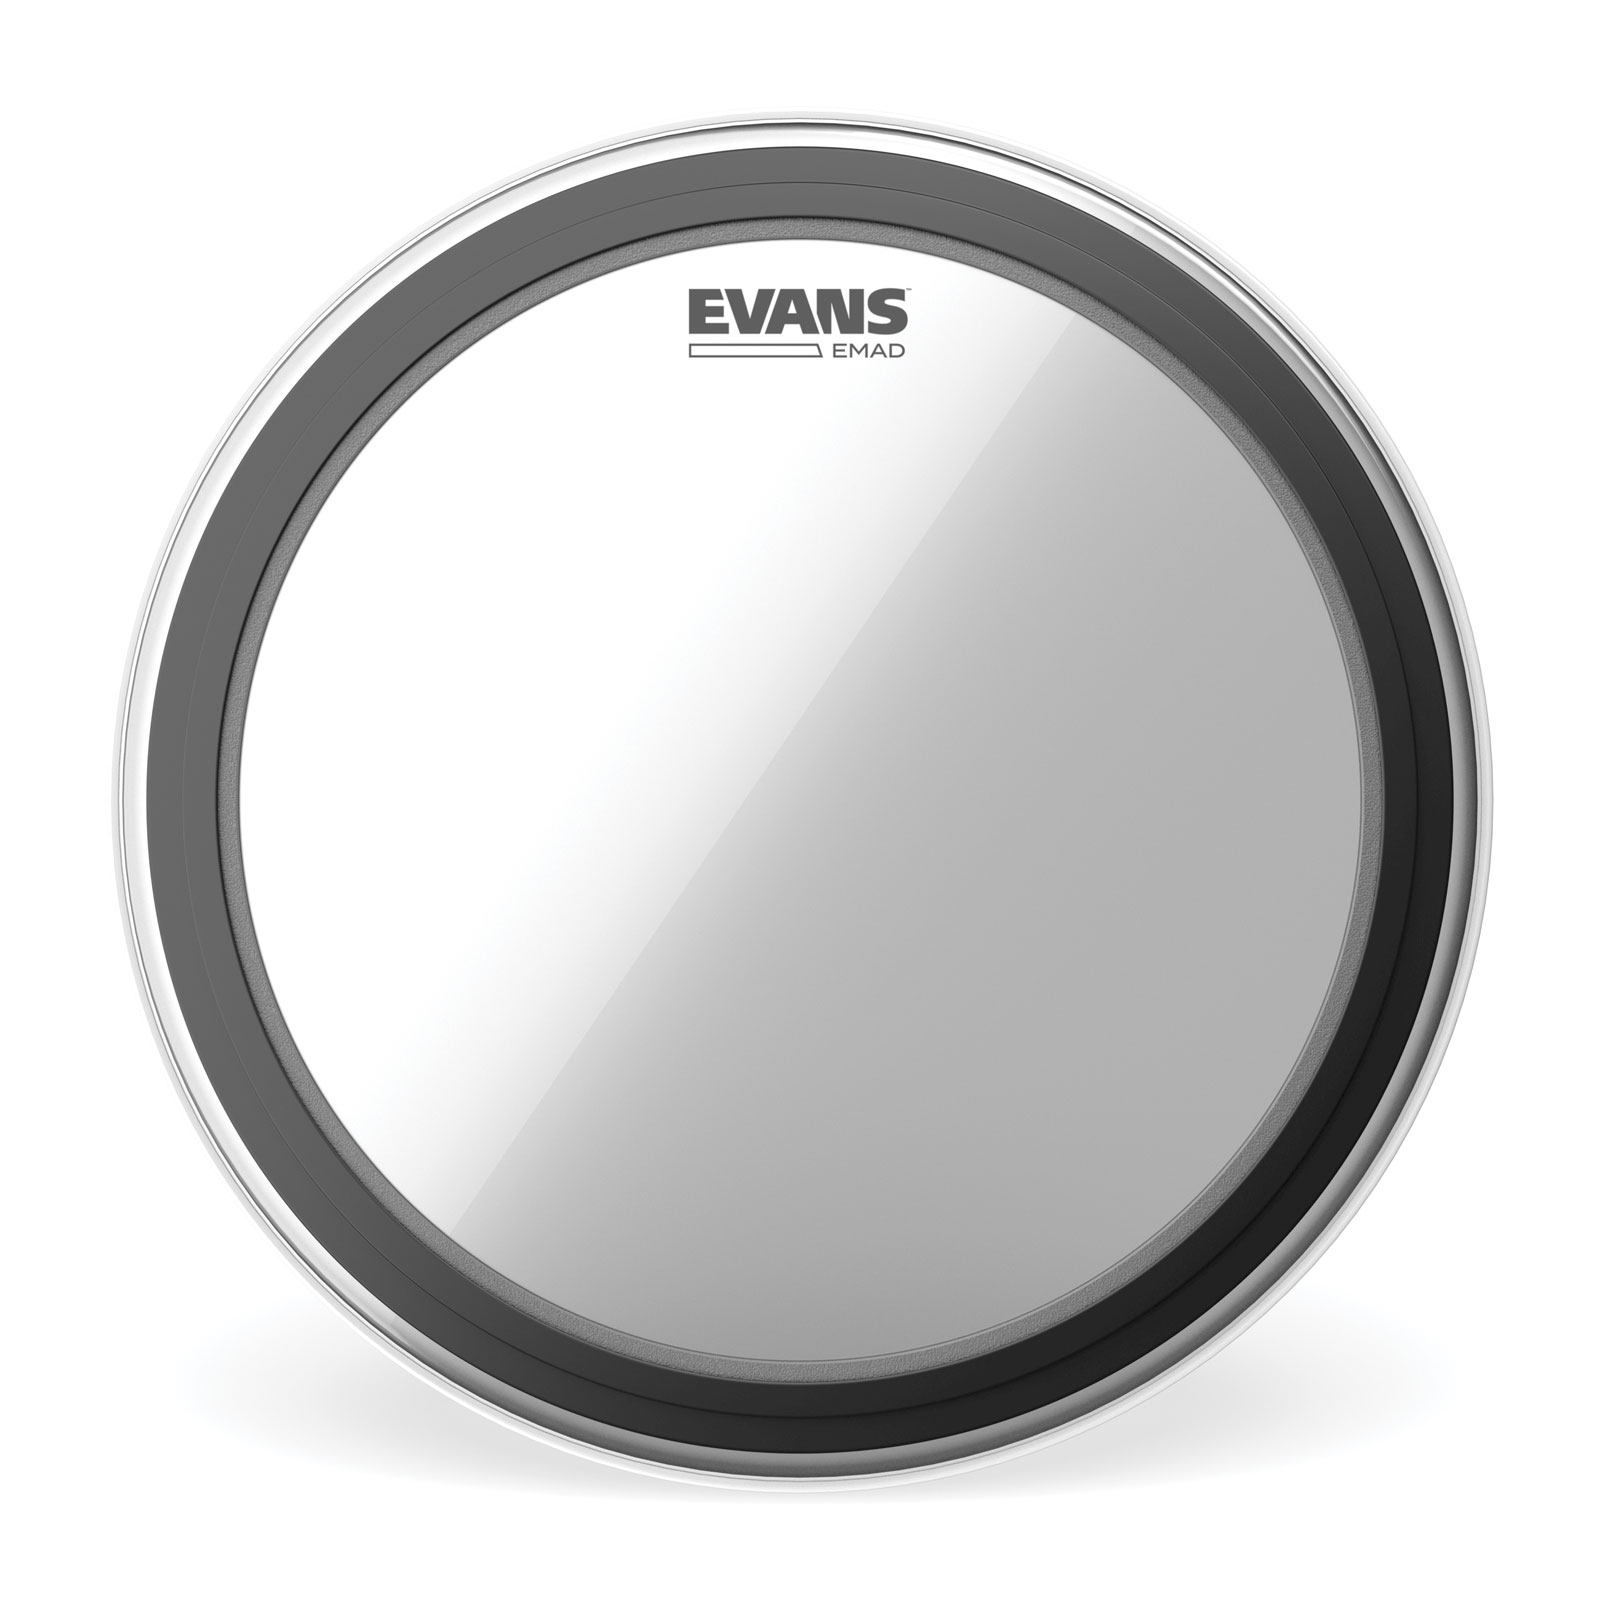 EVANS BD20EMAD - EMAD CLEAR 20